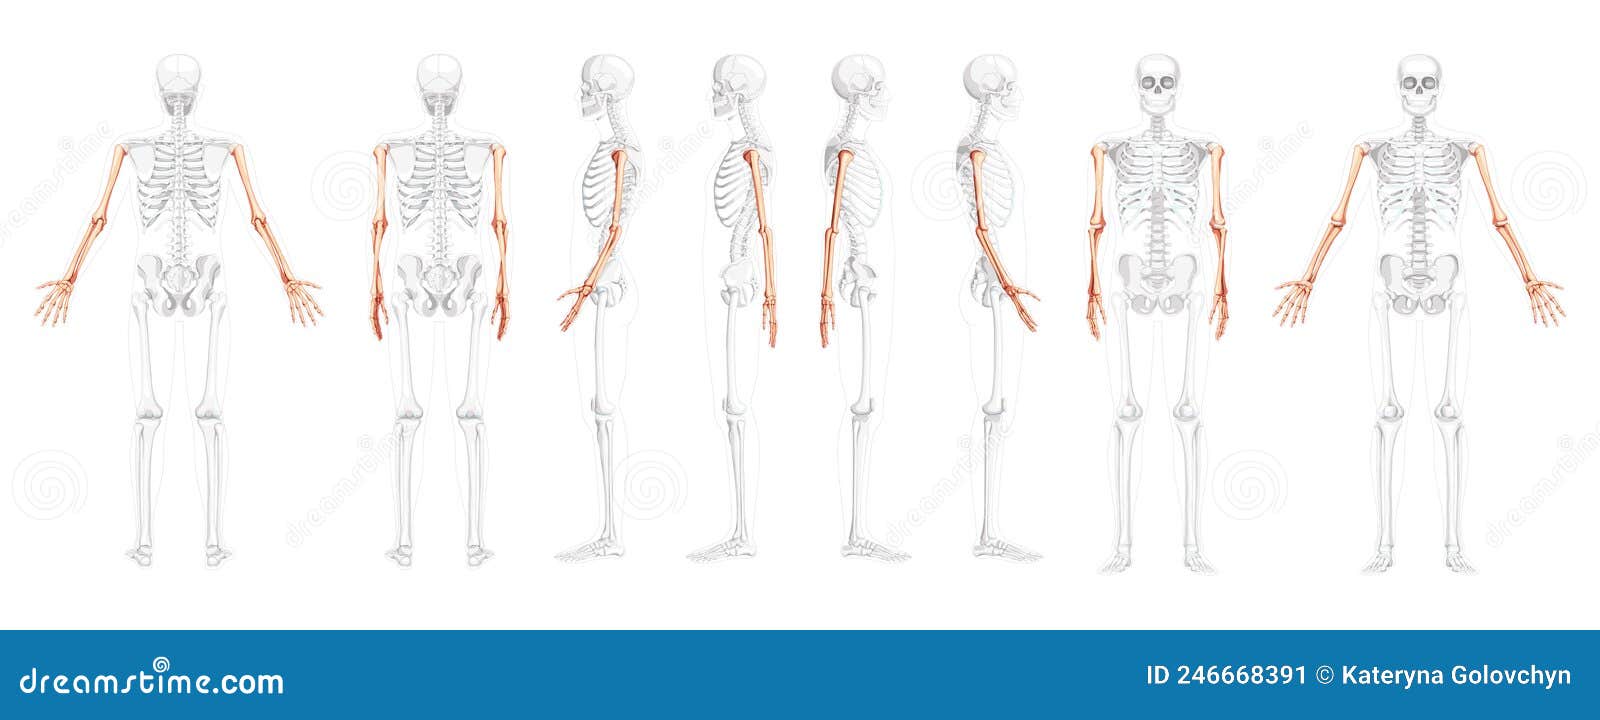 Skeleton Arms Human Lateral Side View With Partly Transparent Bones ...